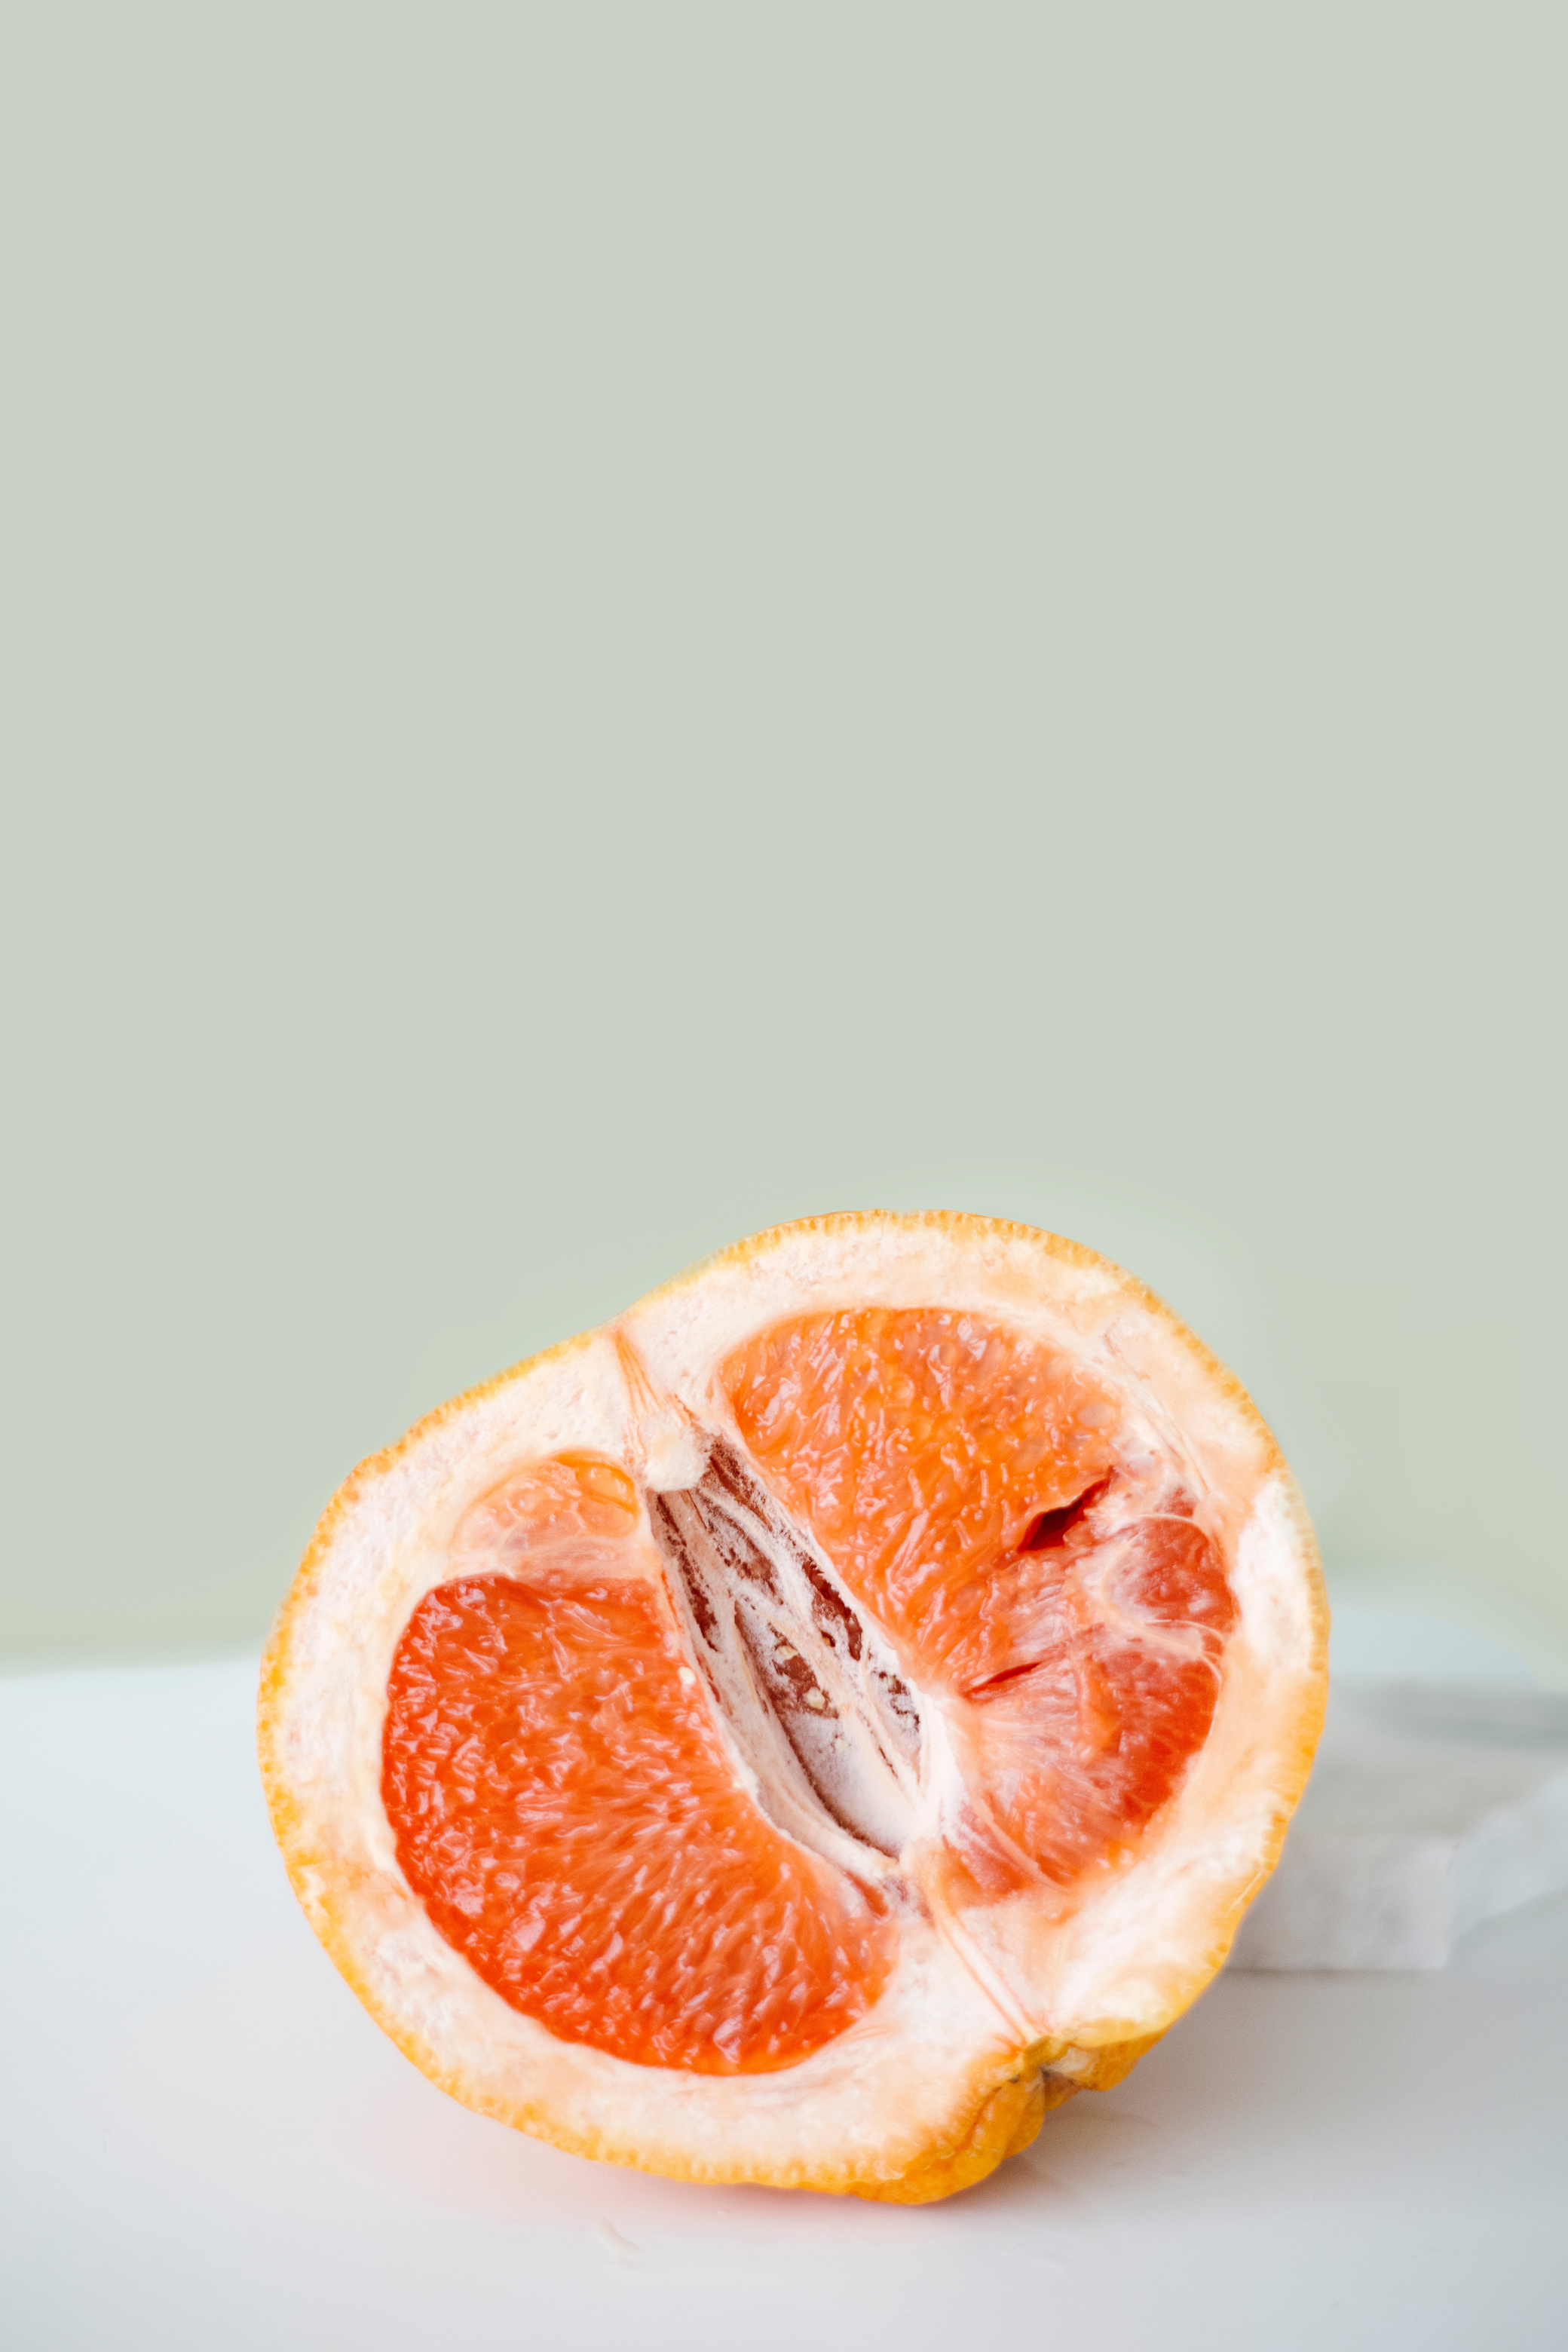 A Slice of Grapefruit on White Surface